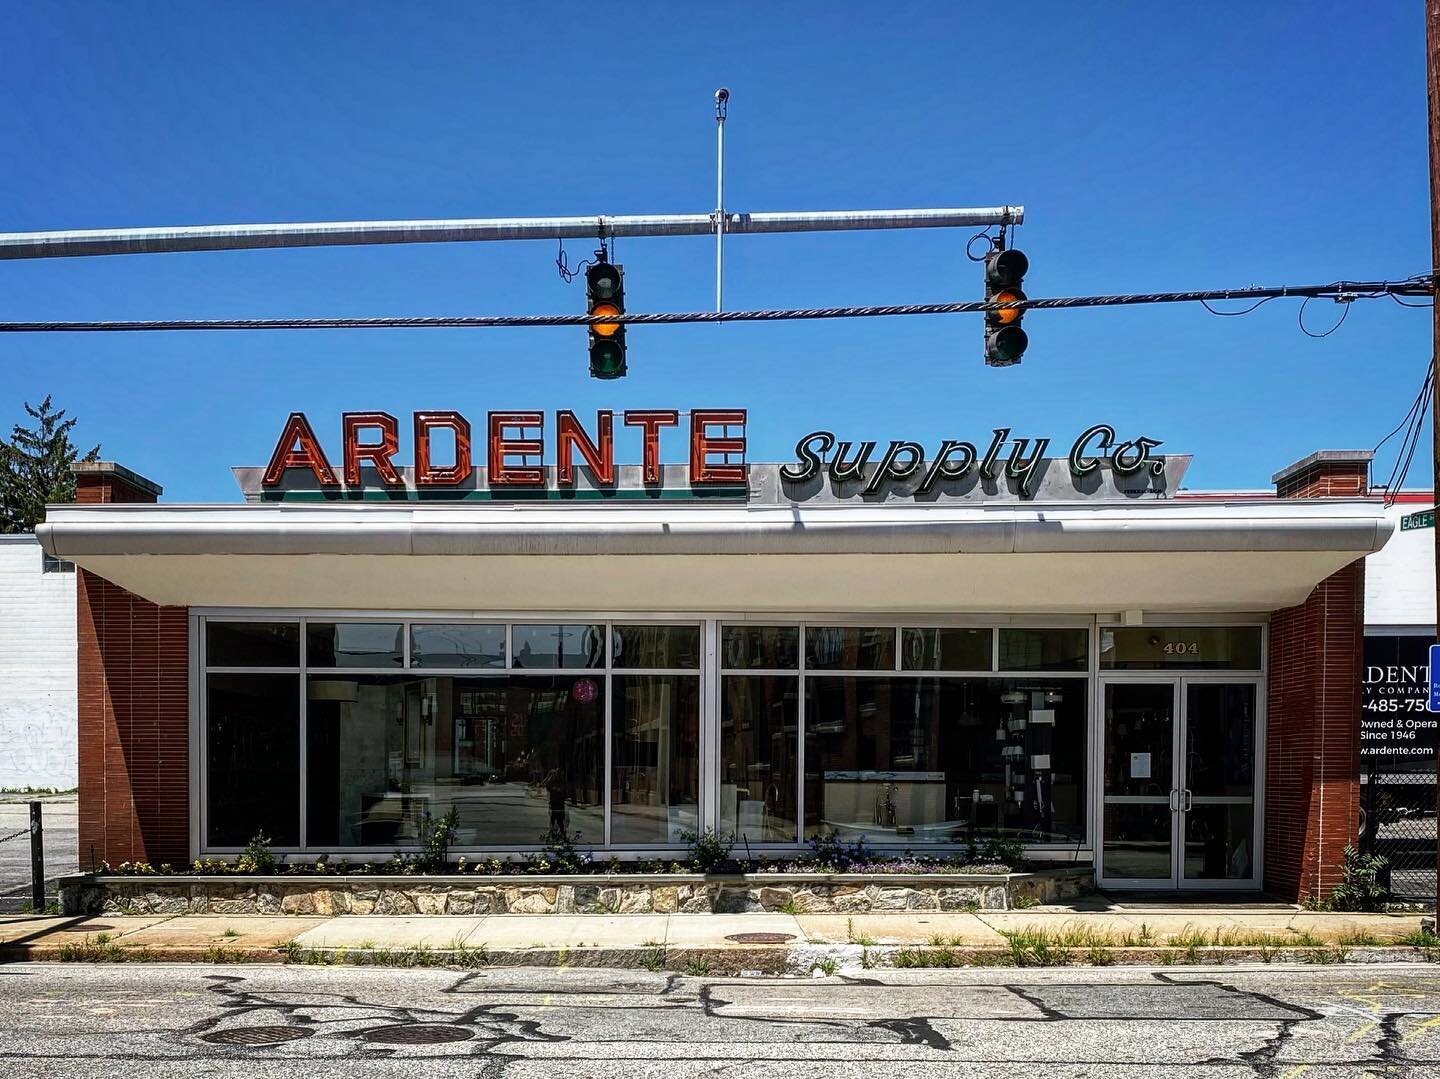 Driving north on Eagle Street just past the Woonasquatucket River in Providence, RI and the road ends, but it ends right at Ardente Supply Co. which has been here since 1946. And this place stopped me and had me struggling standing in the middle of a